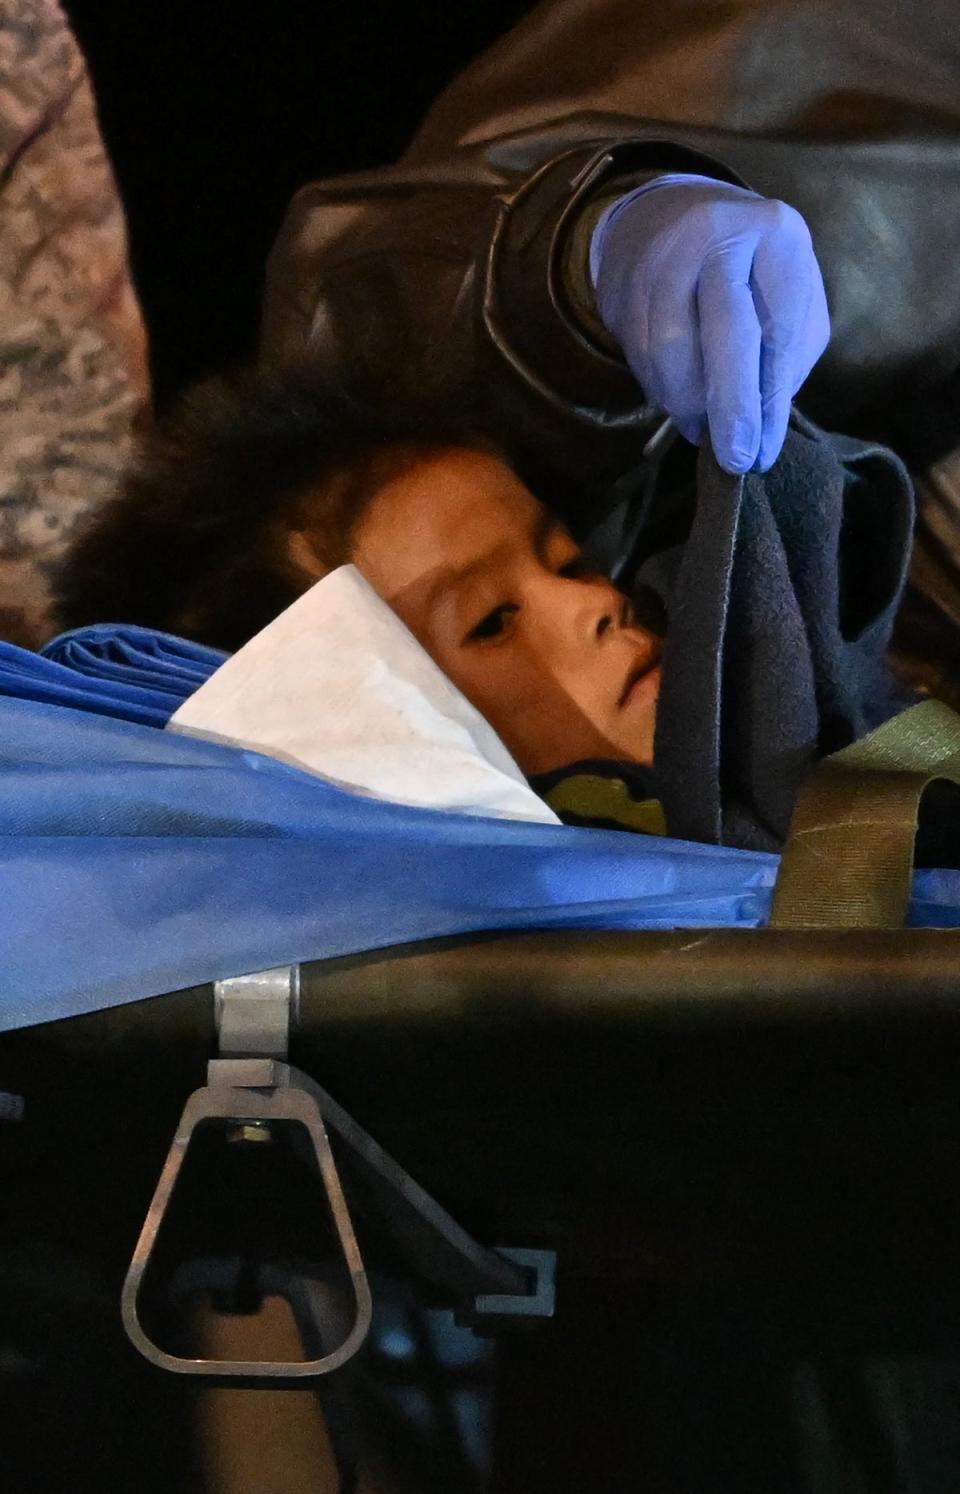 One of the four Indigenous children who were found alive after being lost for 40 days in the Colombian Amazon forest following a plane crash, is stretchered out of a plane upon landing at the CATAM military base in Bogota on 10 June 2023. (AFP via Getty Images)